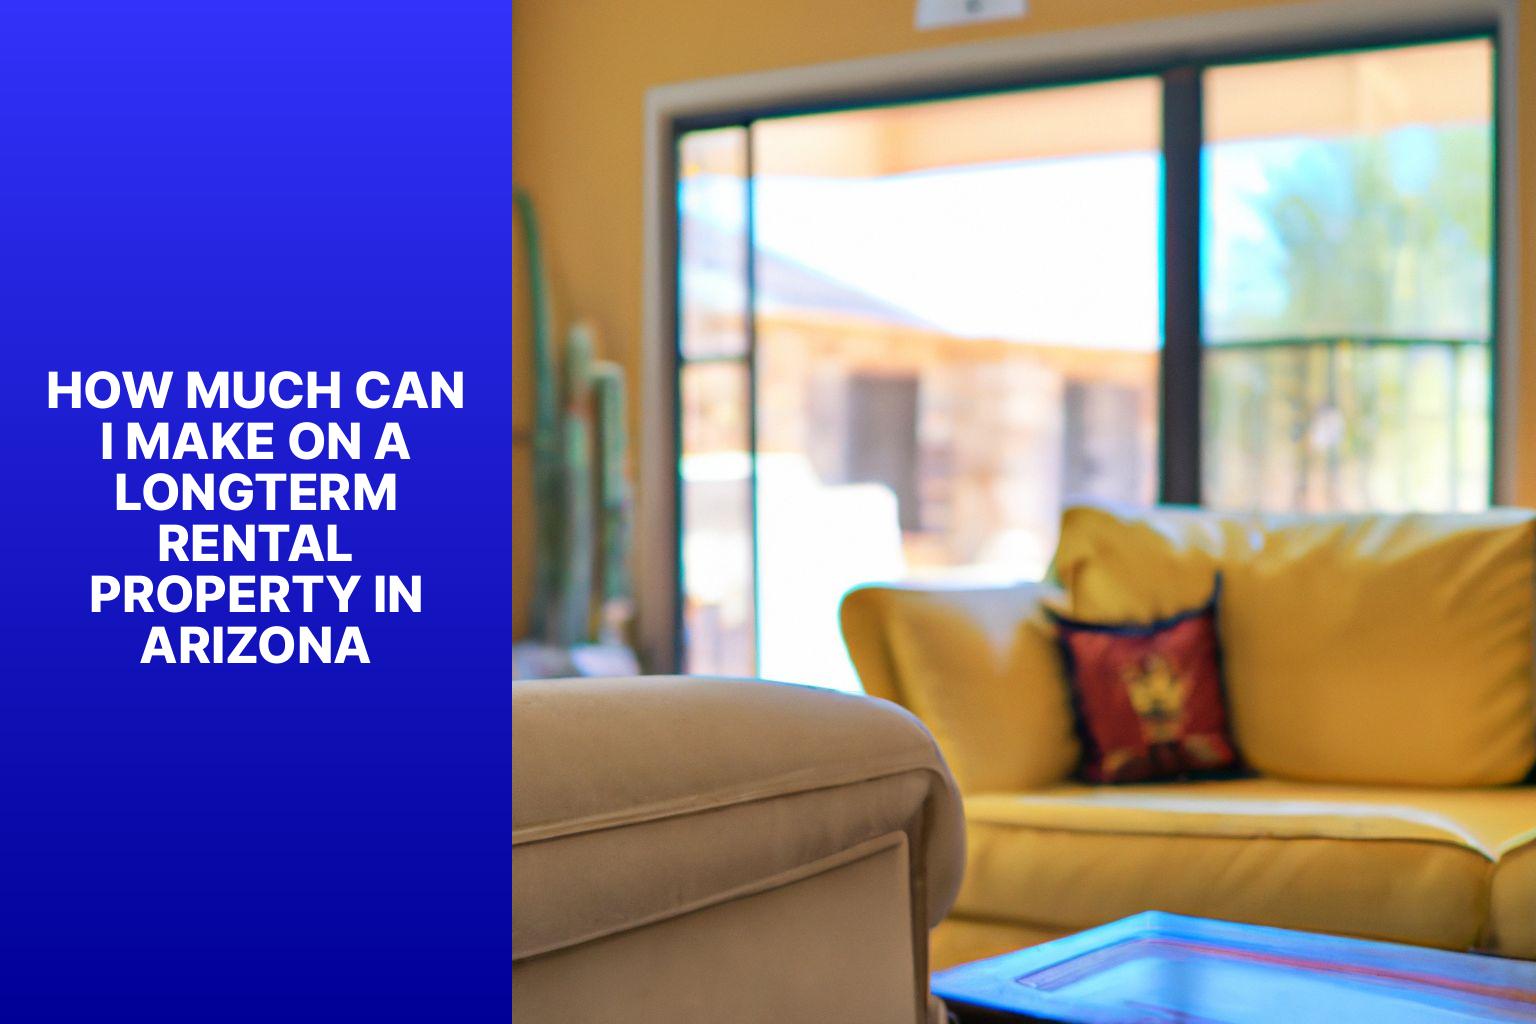 How much can I make on a longterm rental property in Arizona